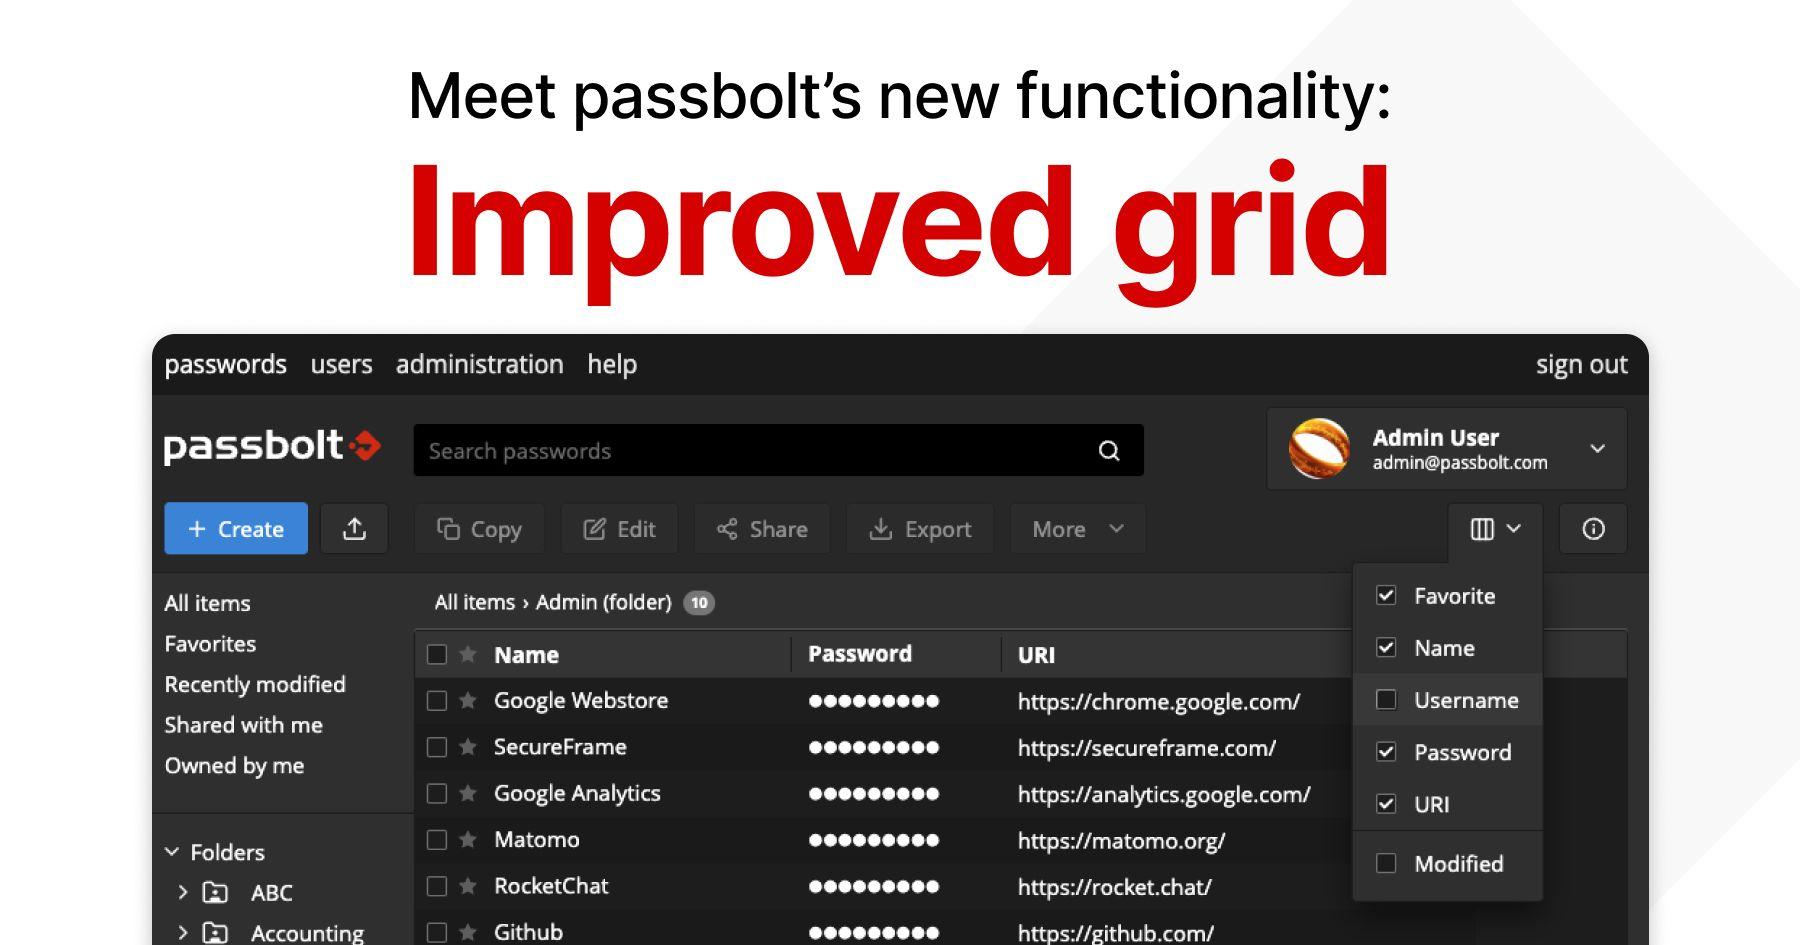 Meet Passbolt’s New Functionality: Improved Grid